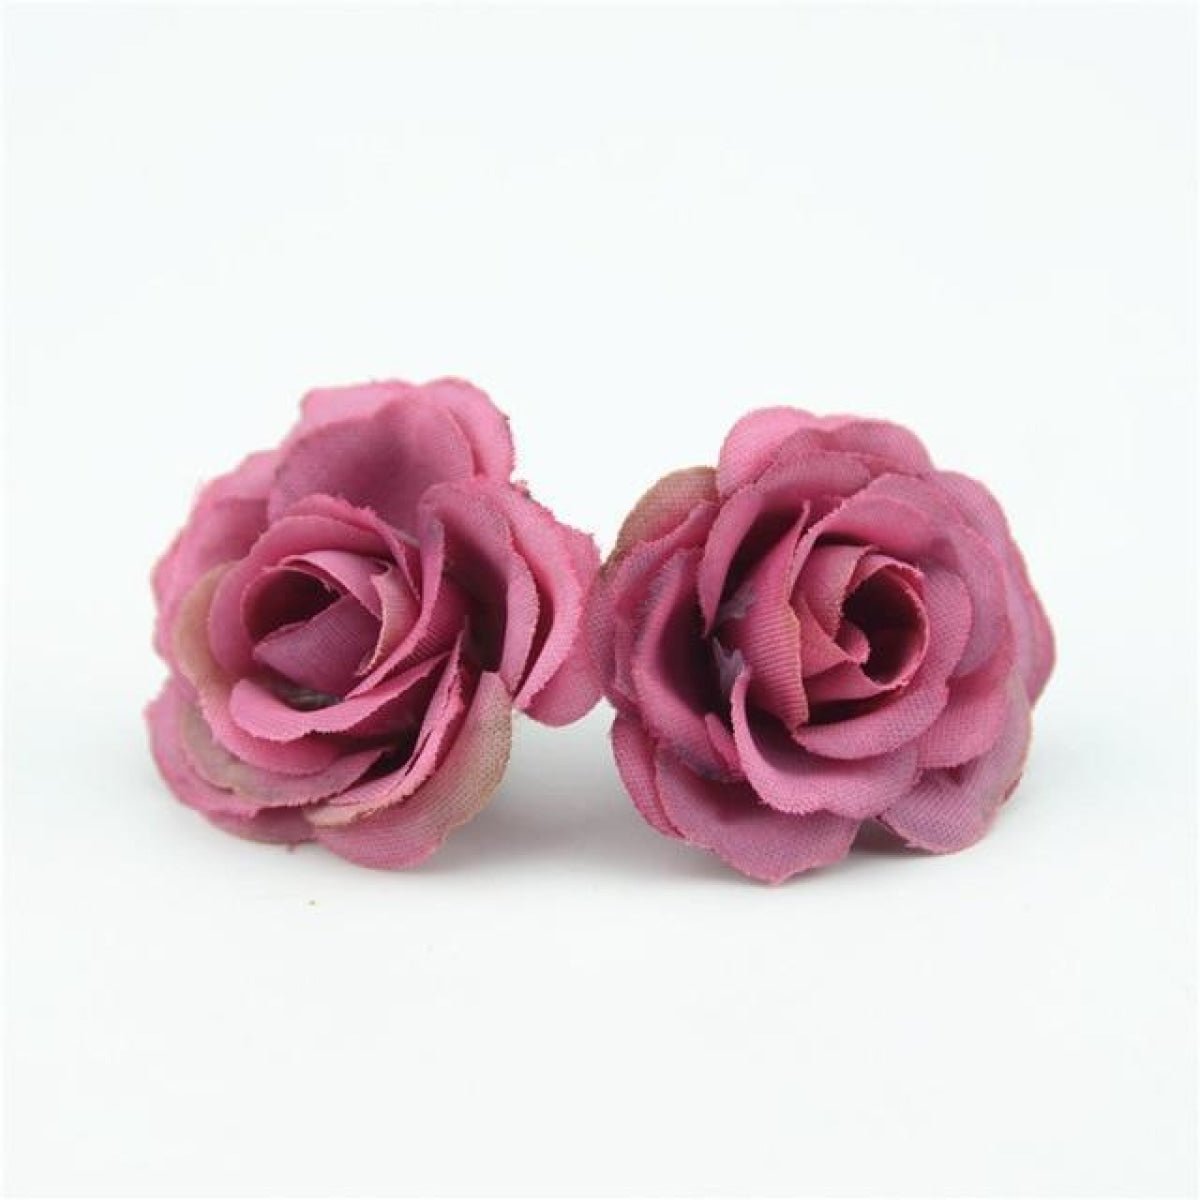 10pcs 2.5cm Mini Rose Cloth Artificial Flower For Wedding Party Home Decorations - Wine red - - Asia Sell